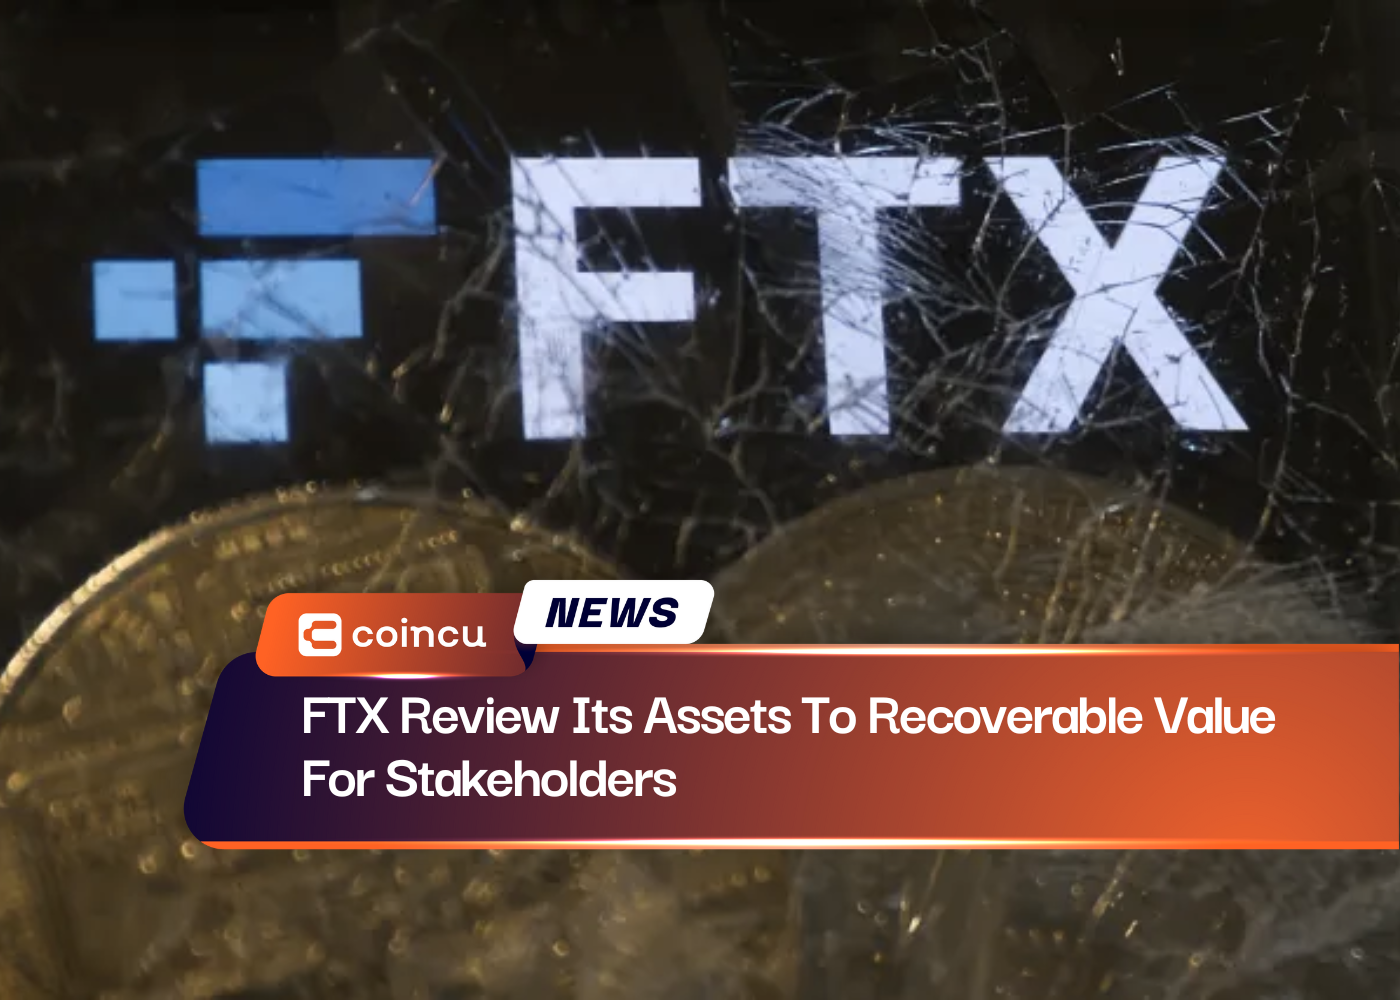 FTX Review Its Assets To Recoverable Value For Stakeholders